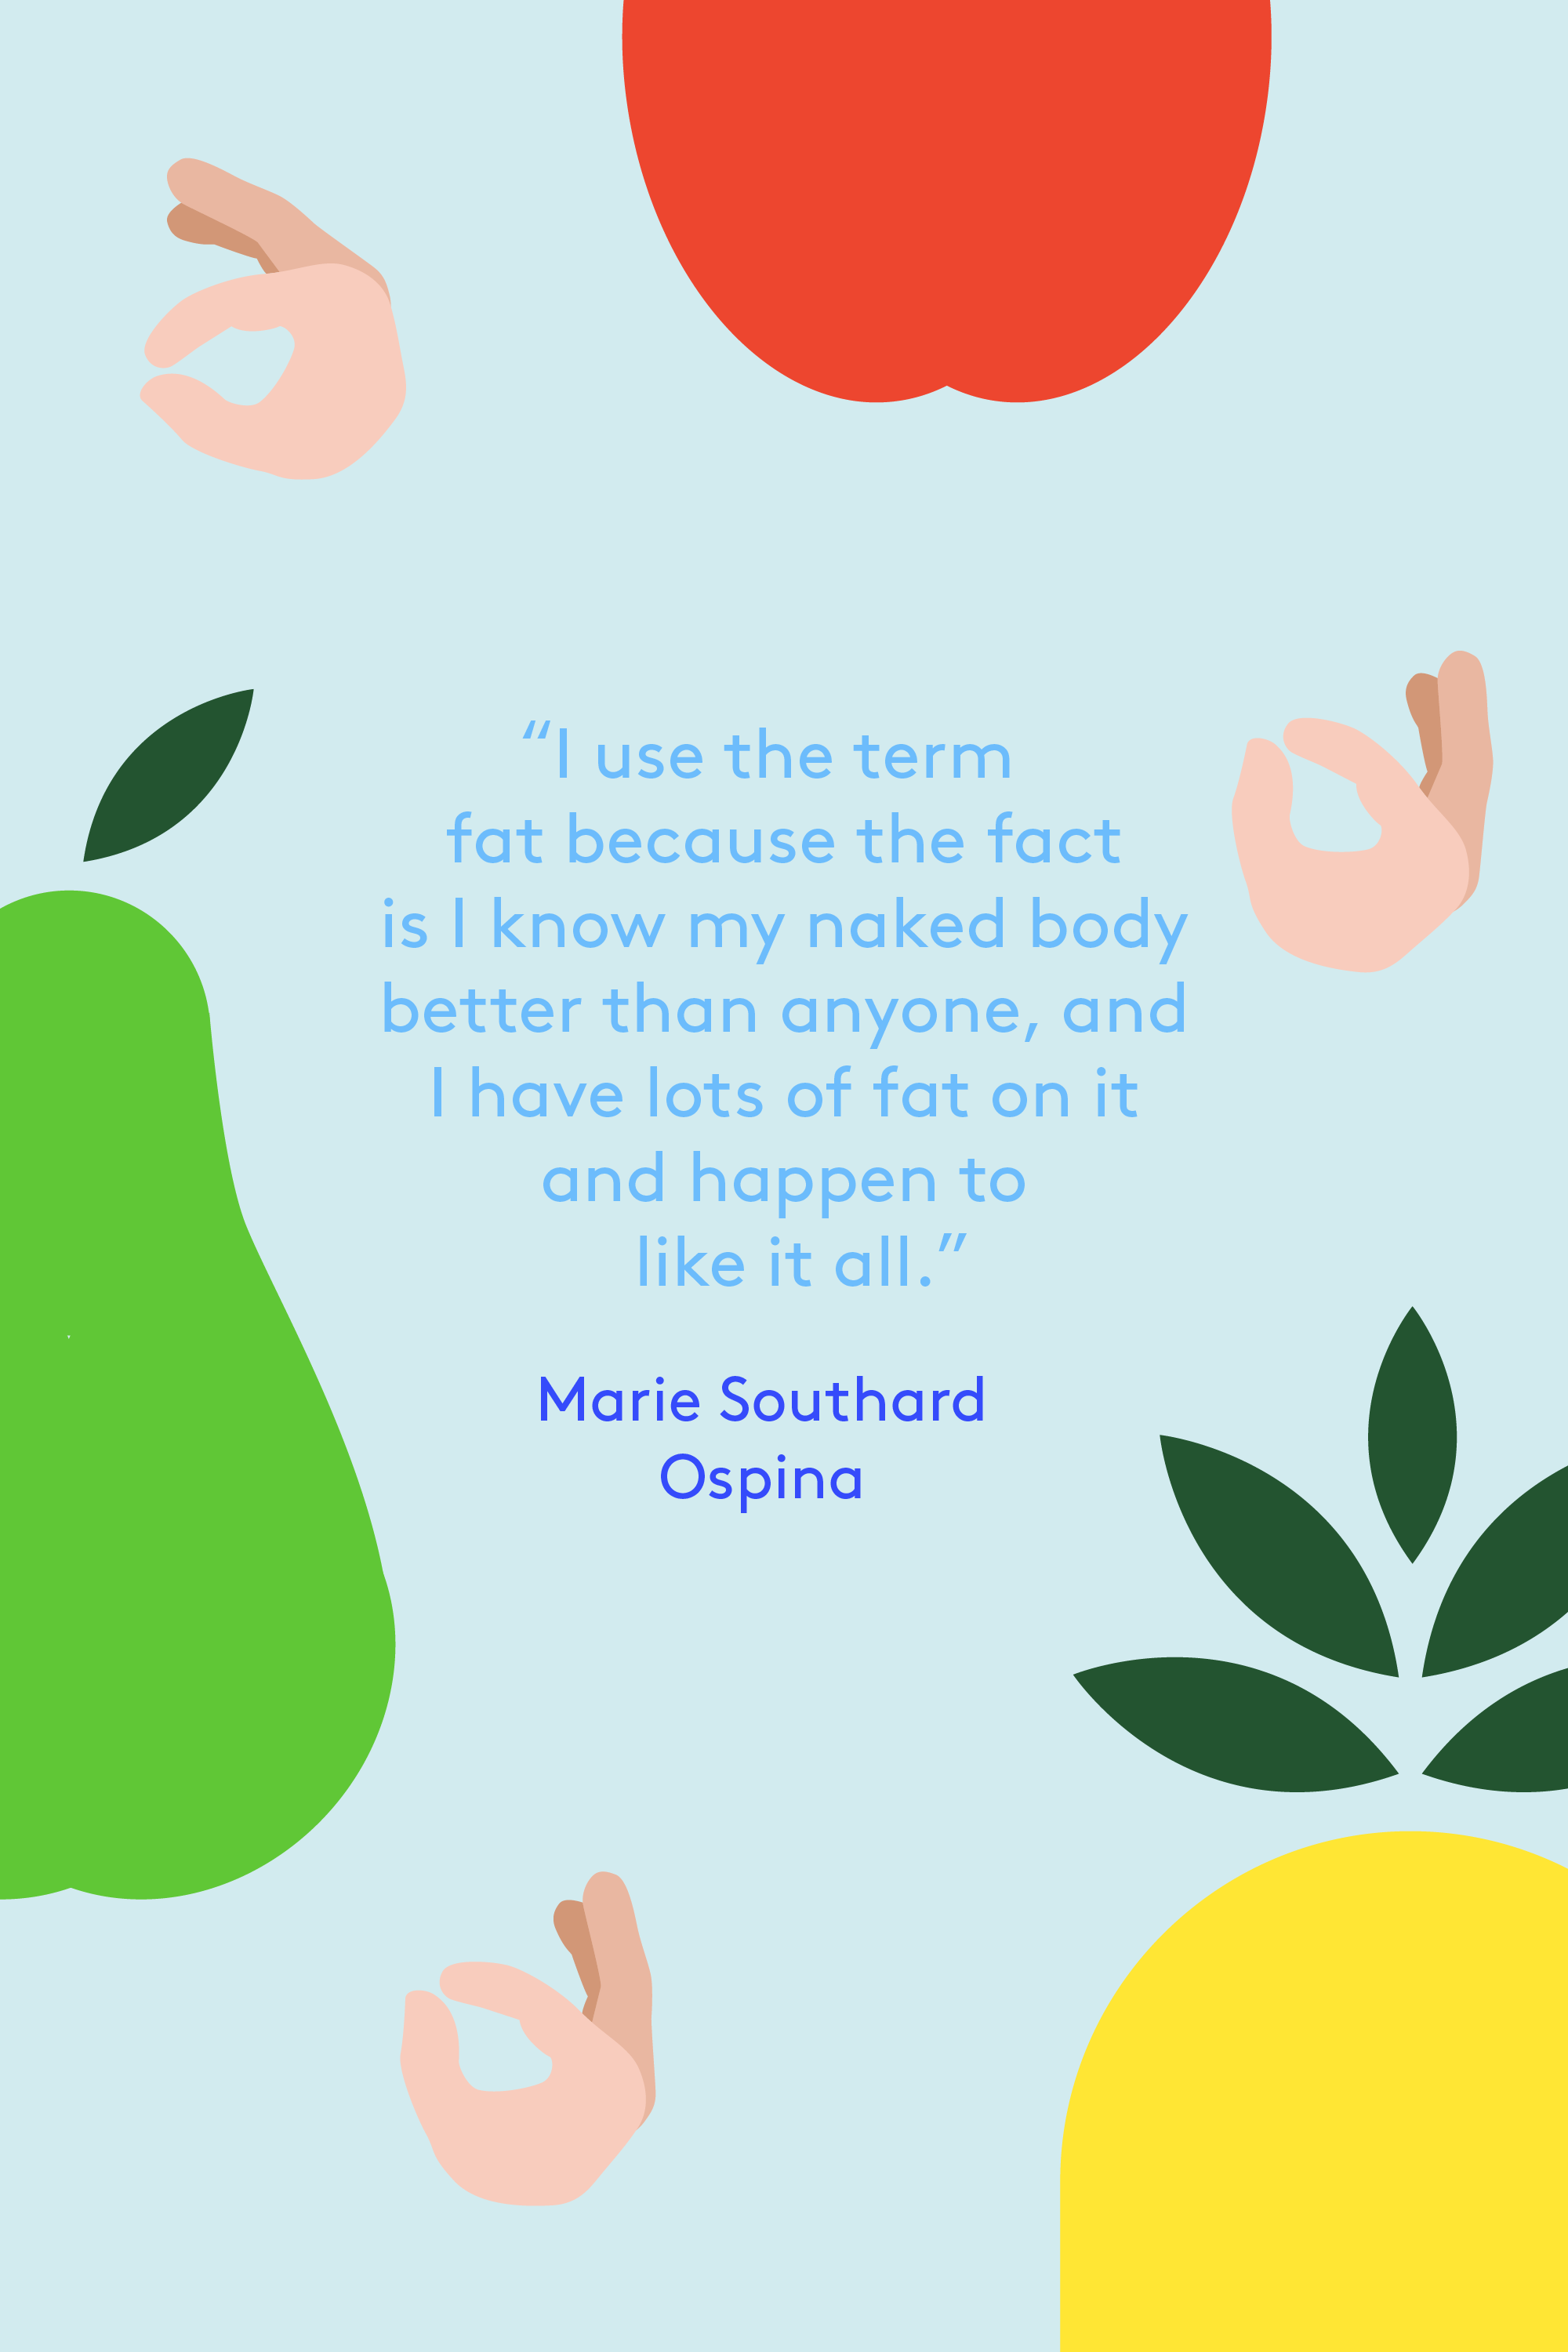 i use the term fat because the fact is i know my naked body better than anyone, and i have lots of fat on it and happen to like it all. marie southard ospina